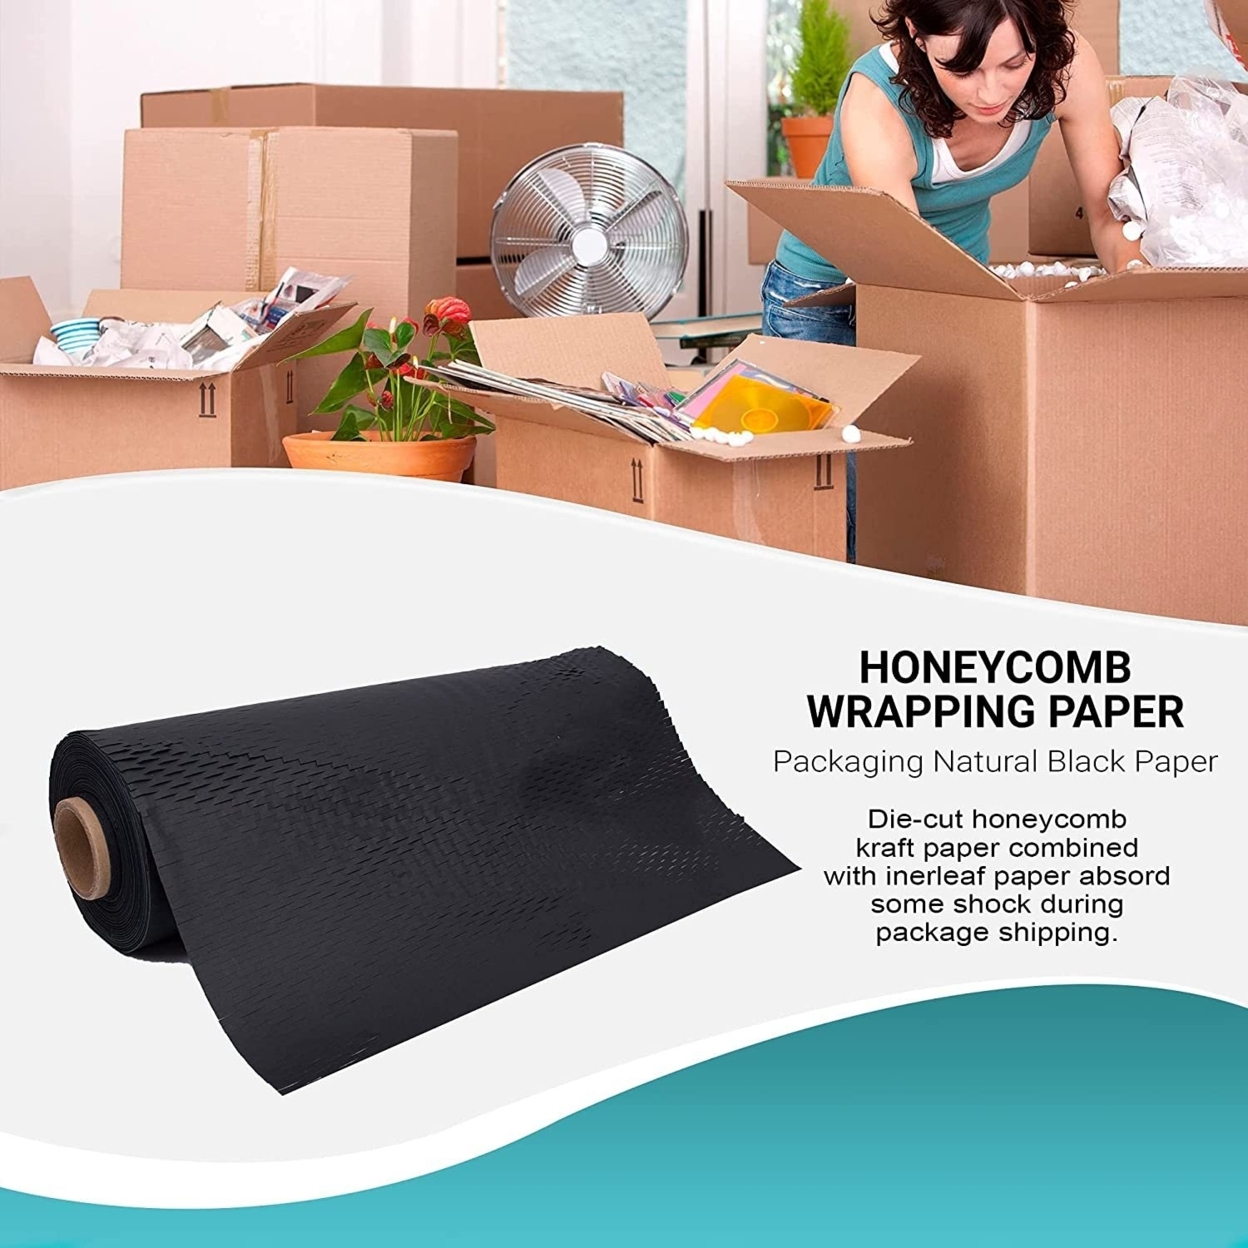 Black Biodegradable Honeycomb Packing Paper 15x164' Perforated Rolls